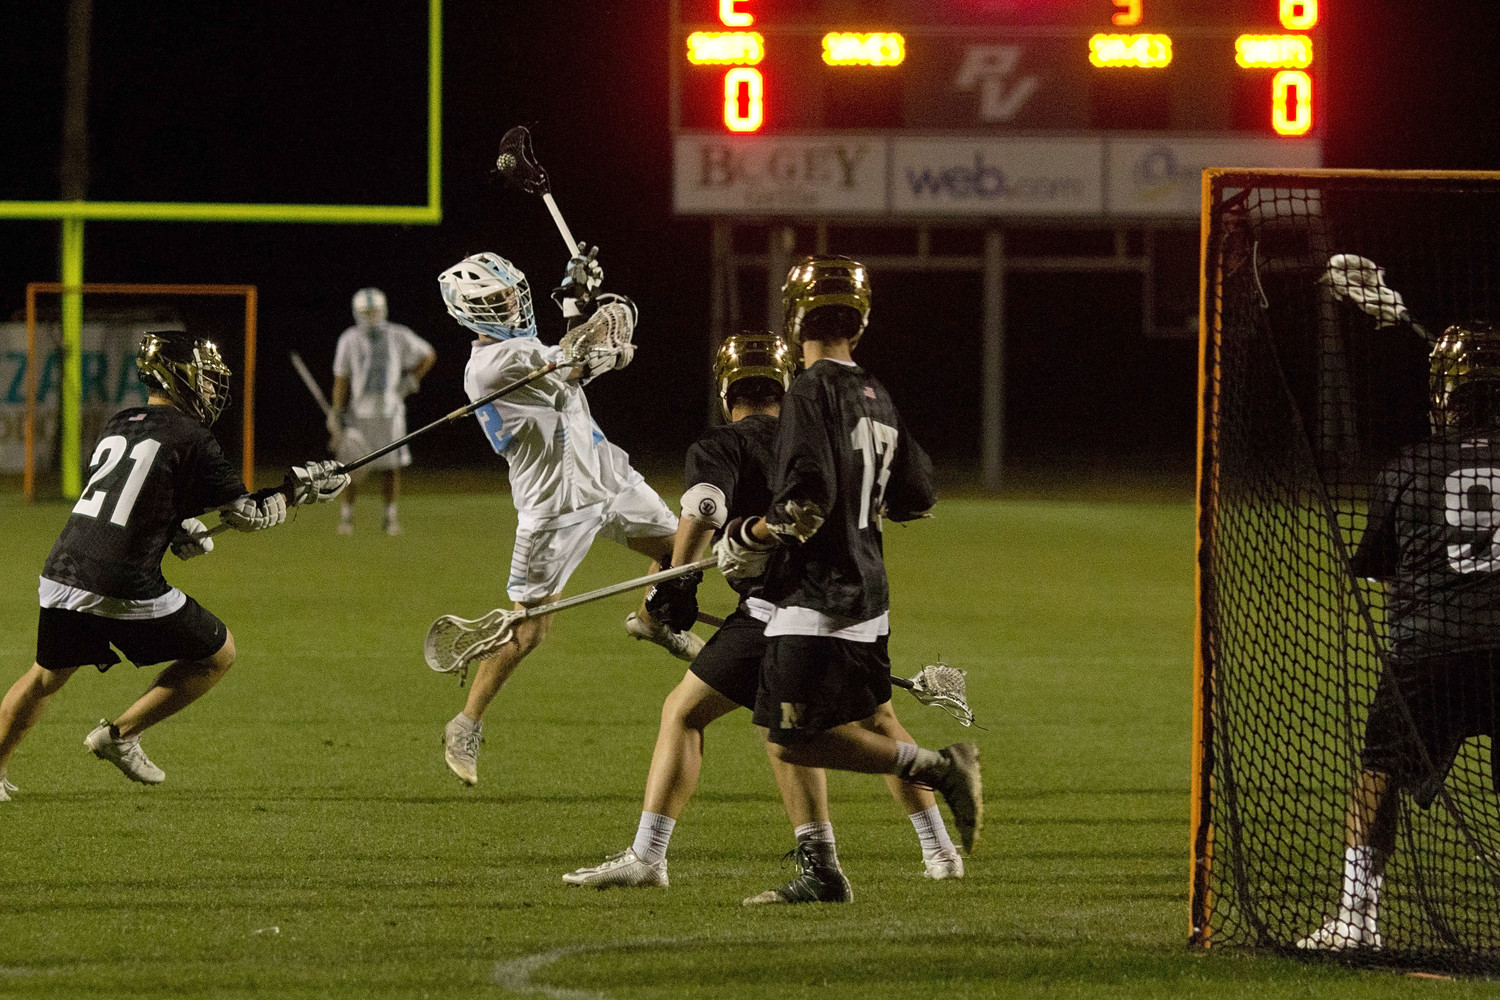 Carter Parlette of Ponte Vedra lines up a low shot that beats the Nease goalie